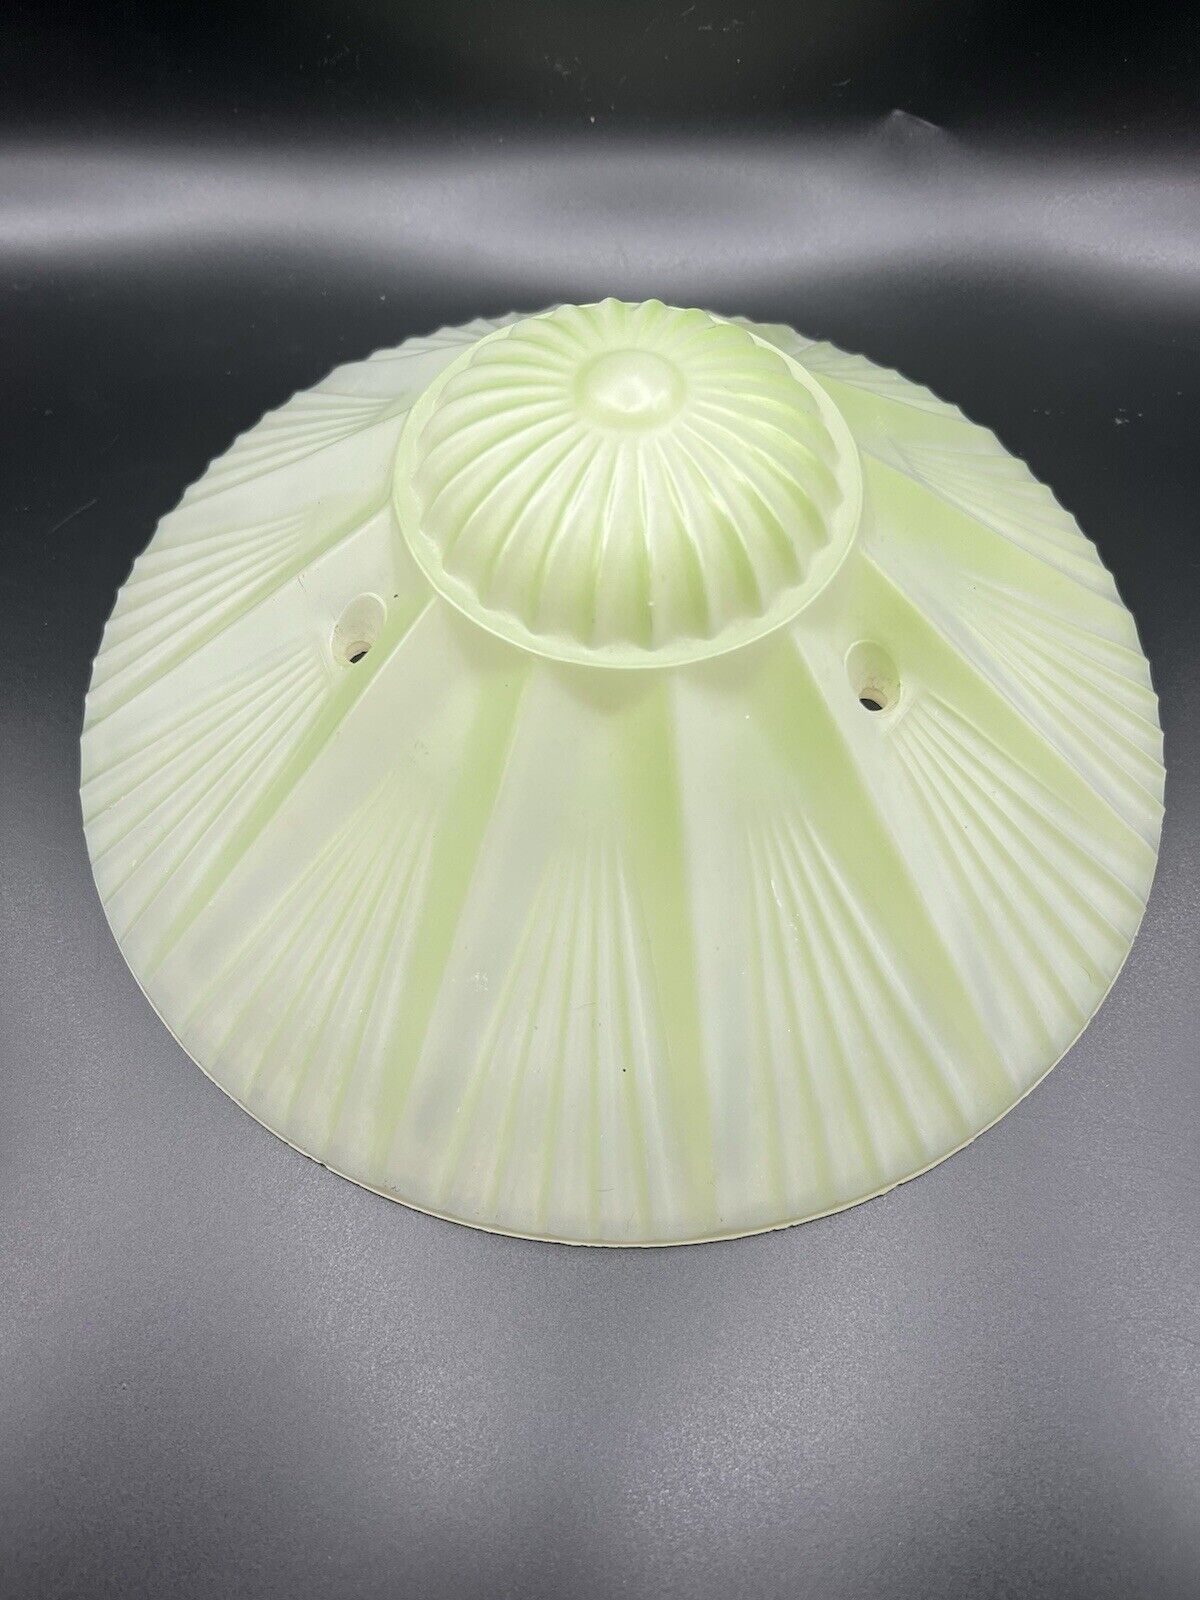 Vintage Art Deco Starburst Frosted Glass Ceiling Light Shade 3 Chain Holes Green